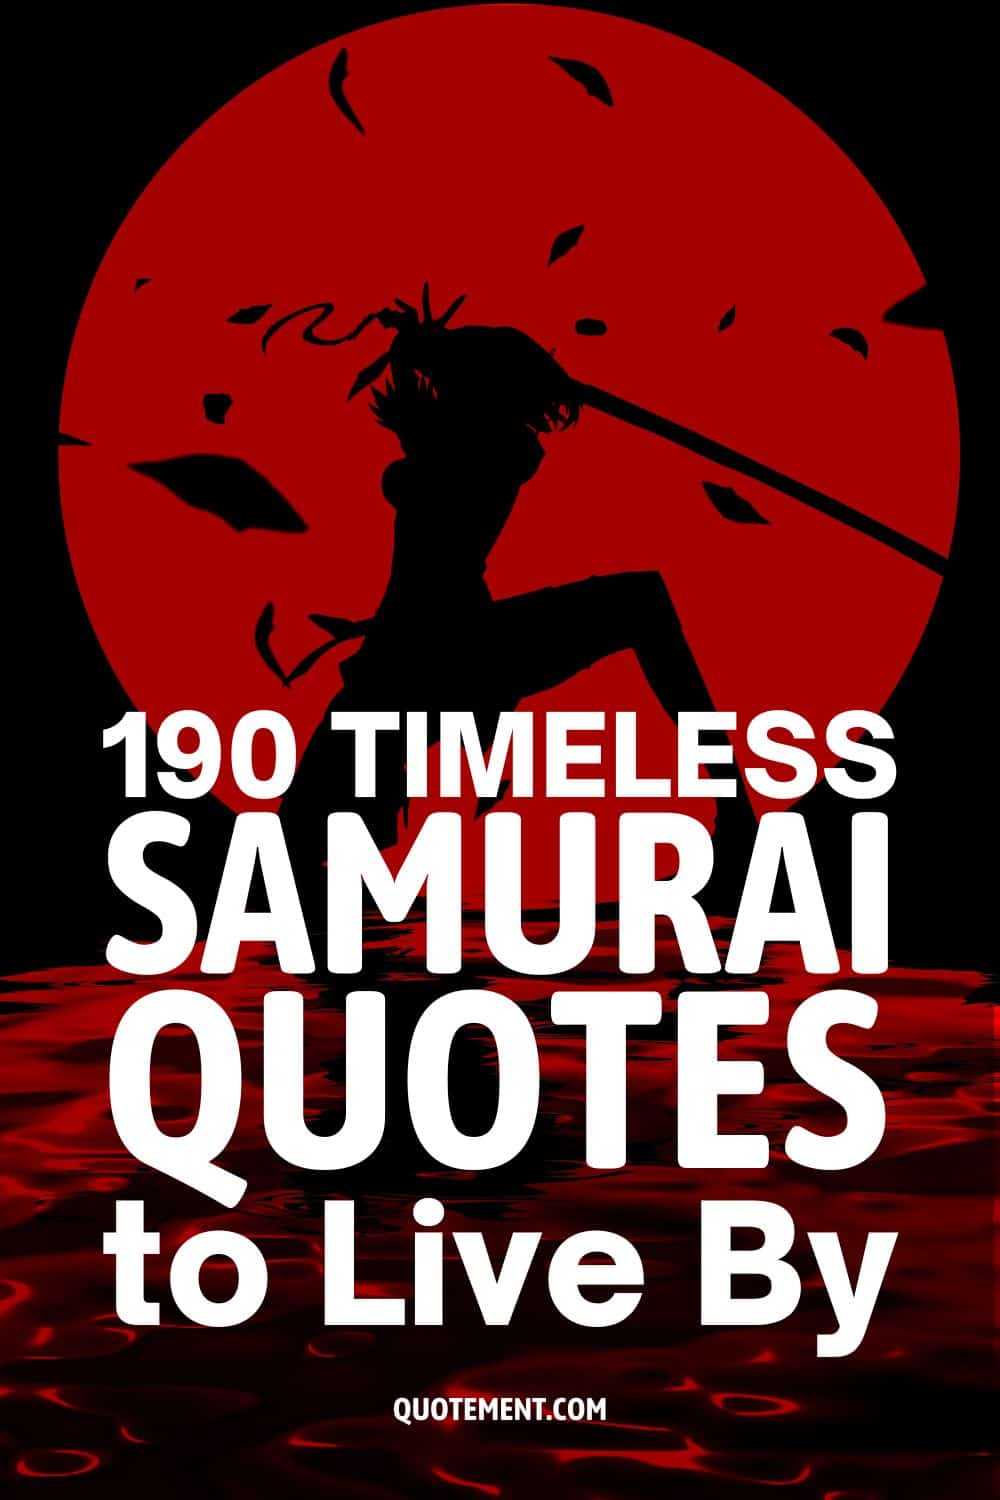 190 Timeless Samurai Quotes to Live By